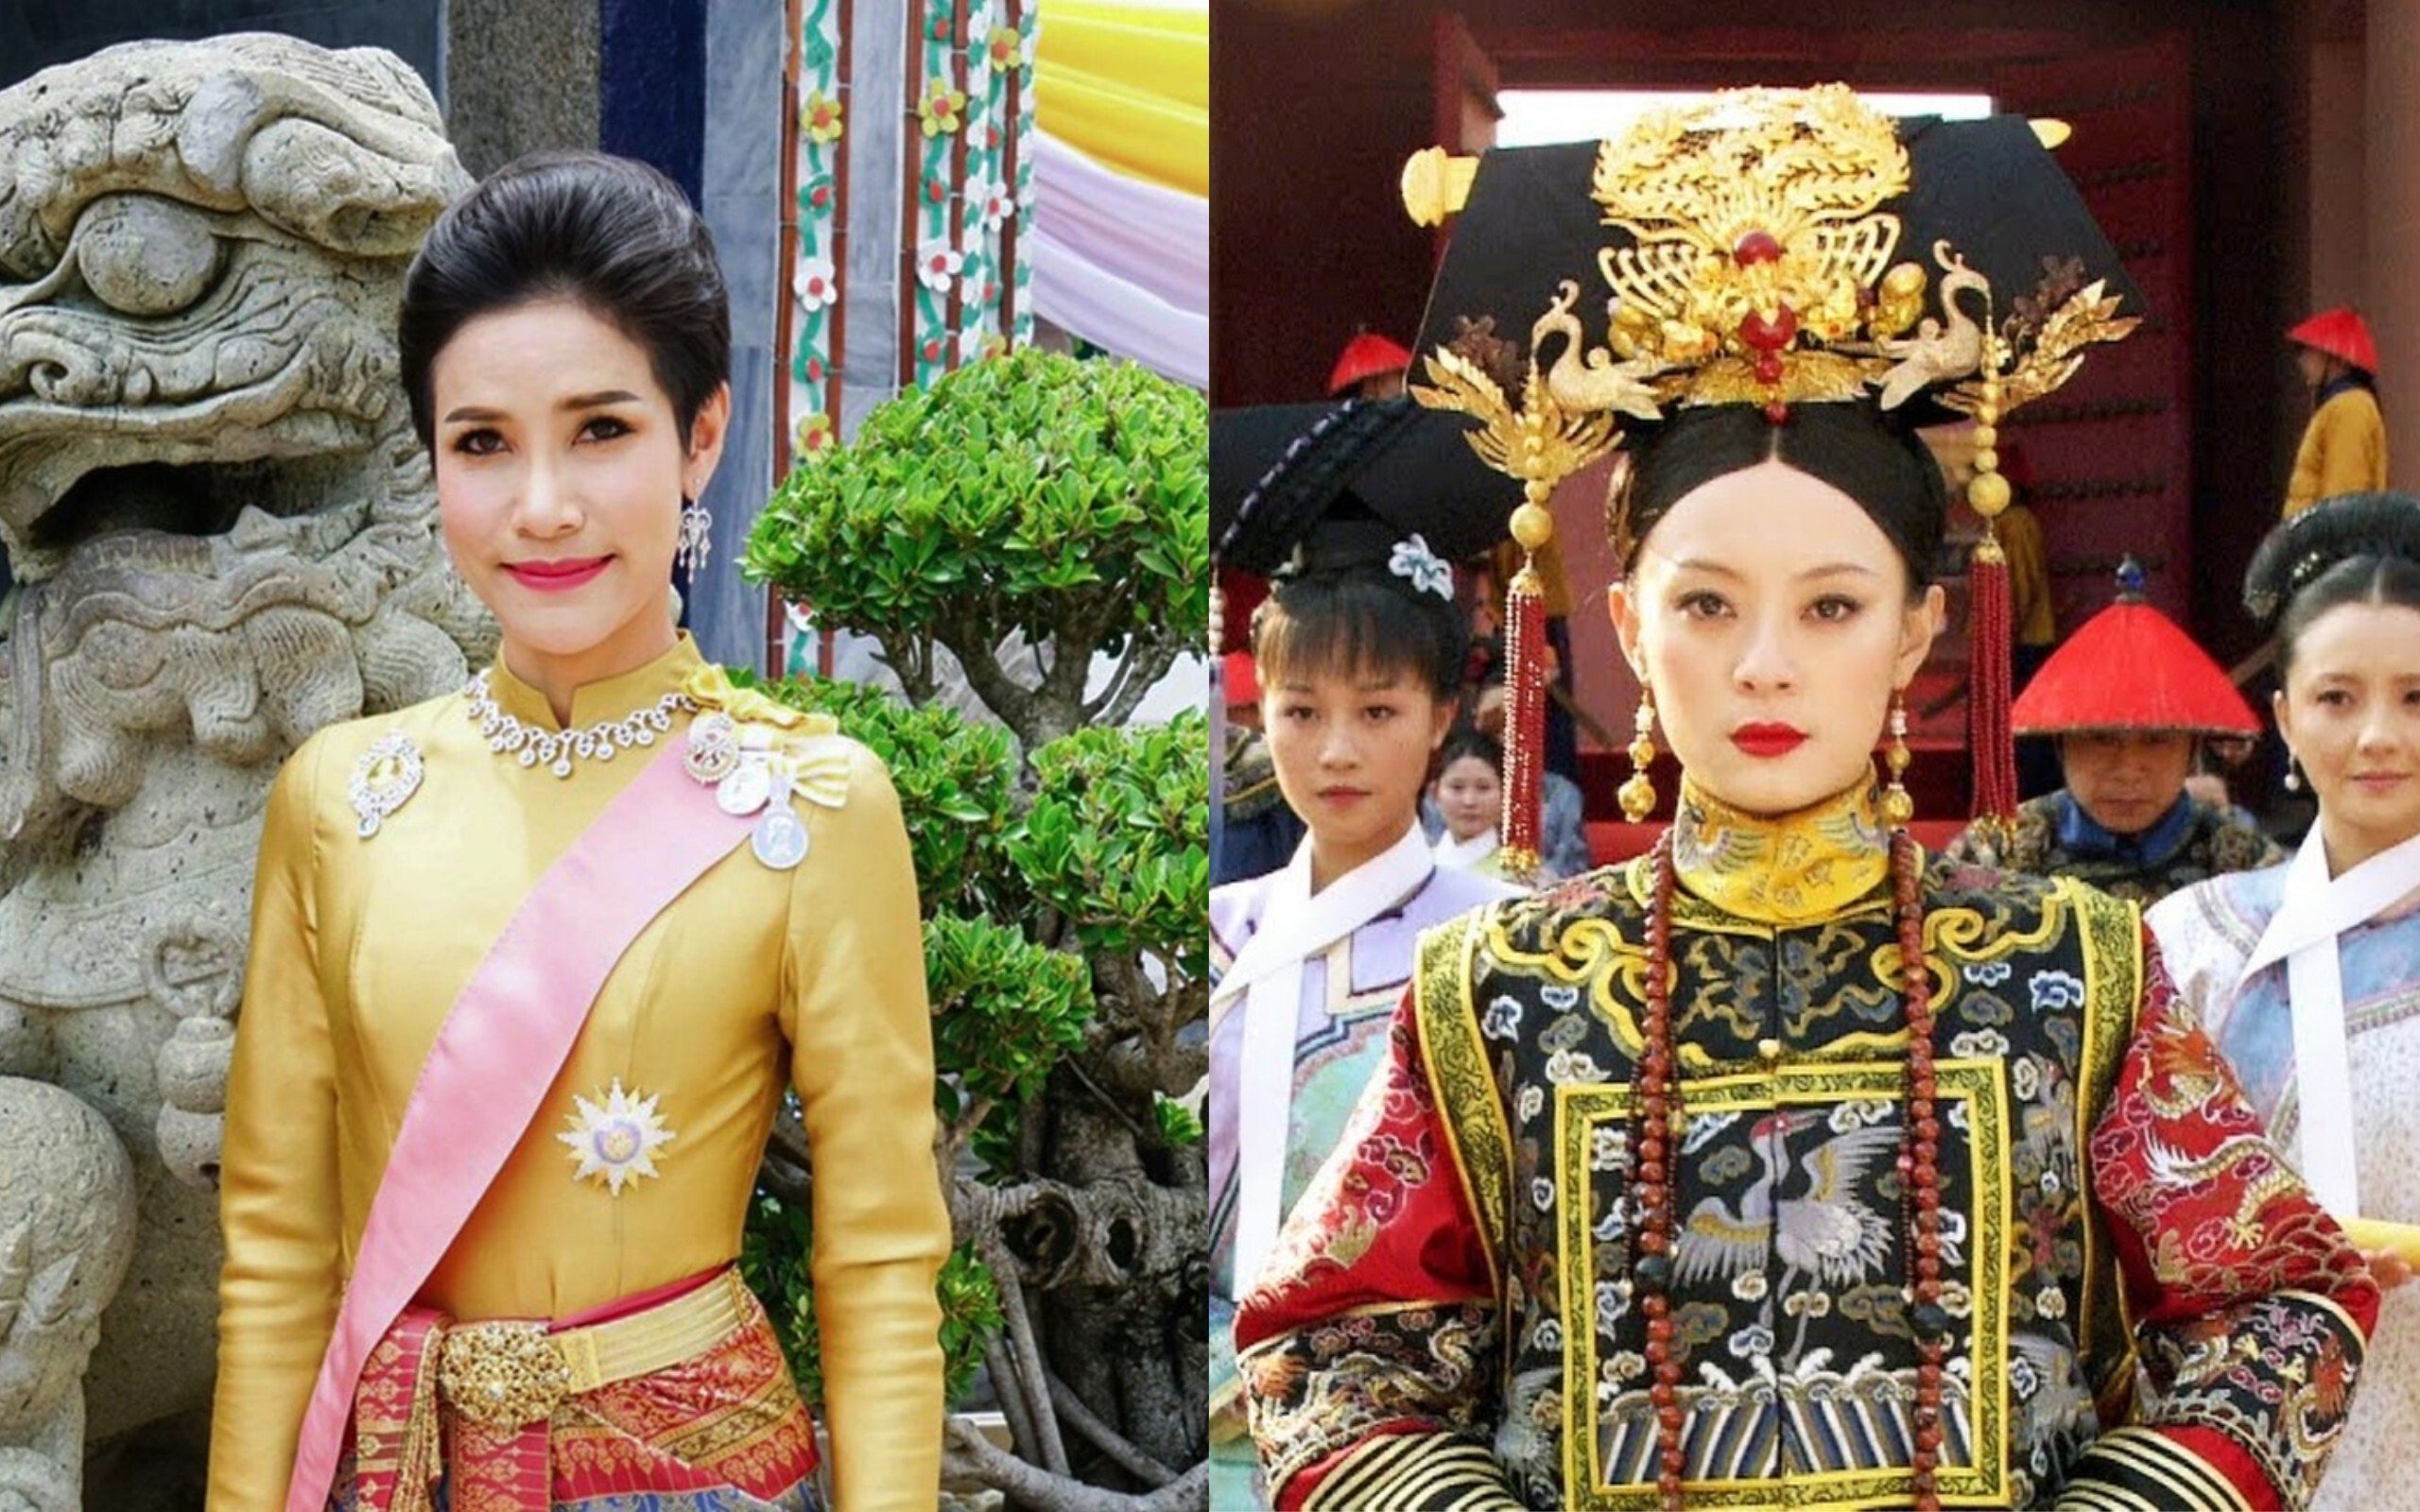 Life imitating art? The return of royal consort Sineenat to the Thai palace has led to comparisons with the character Zhen Huan from Chinese drama series Empresses in the Palace. Photos: handouts